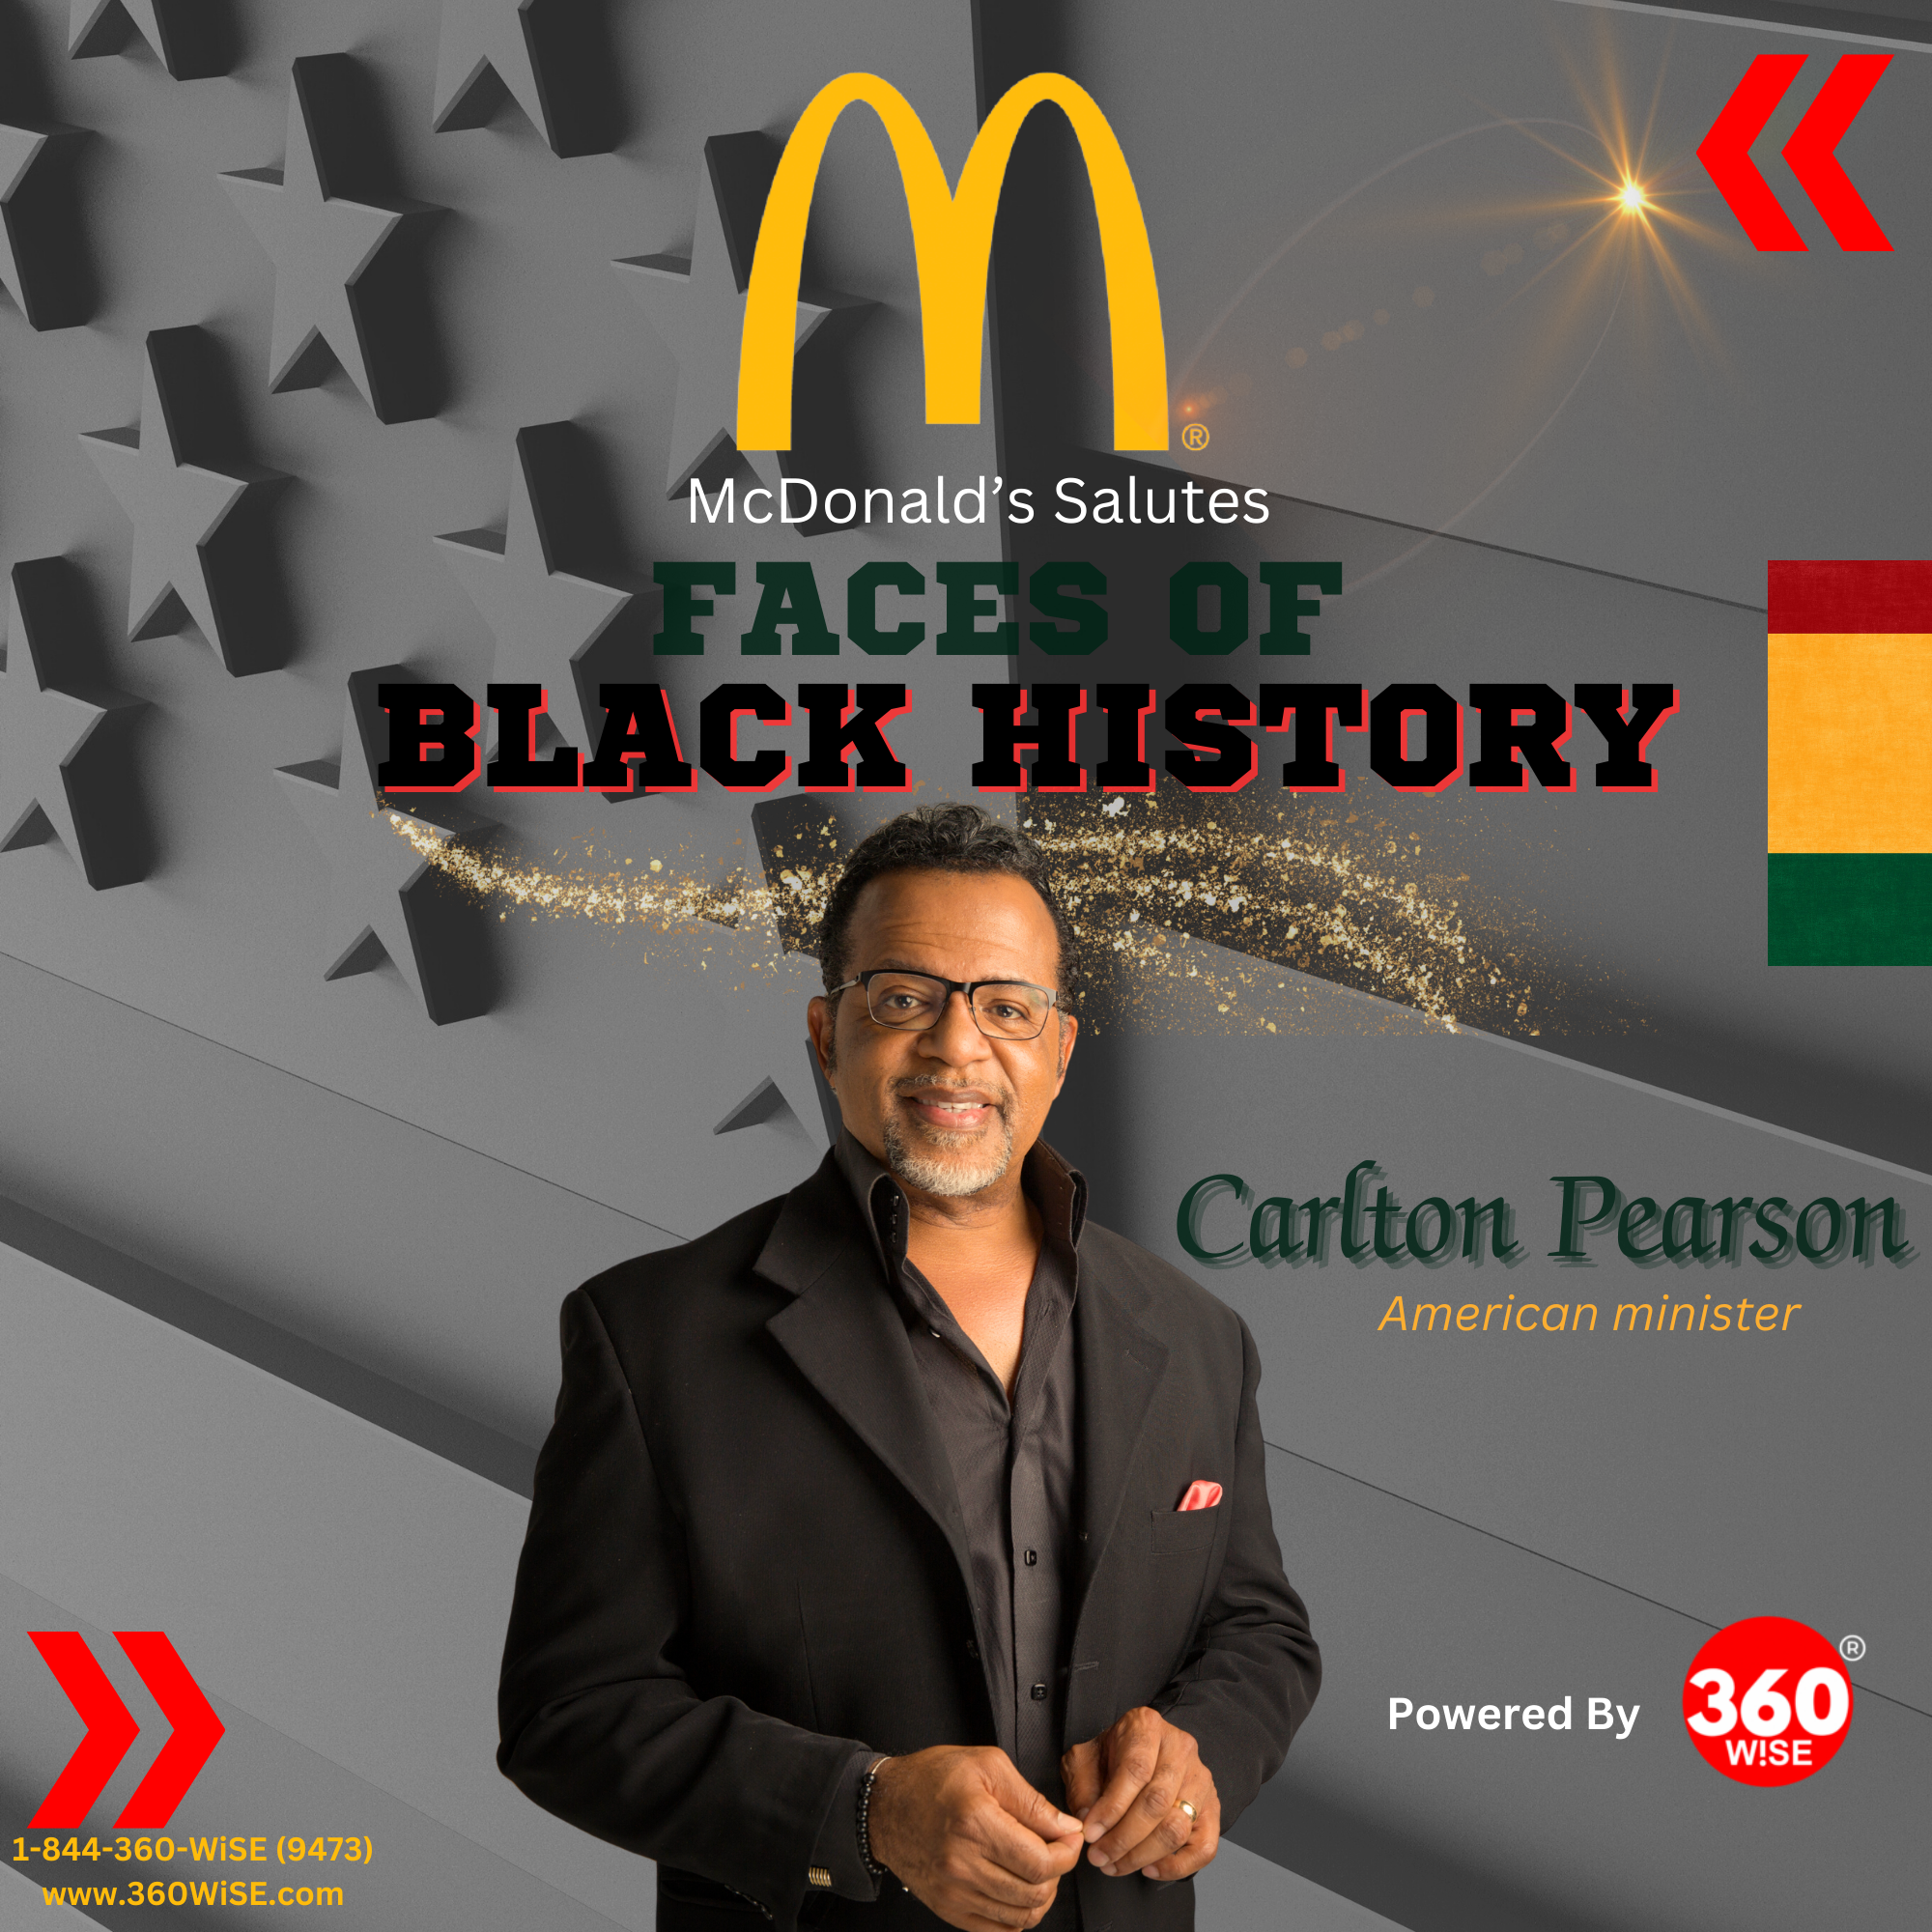 McDonald's Faces of Black History Salutes Carlton Pearson. Powered by 360WiSE